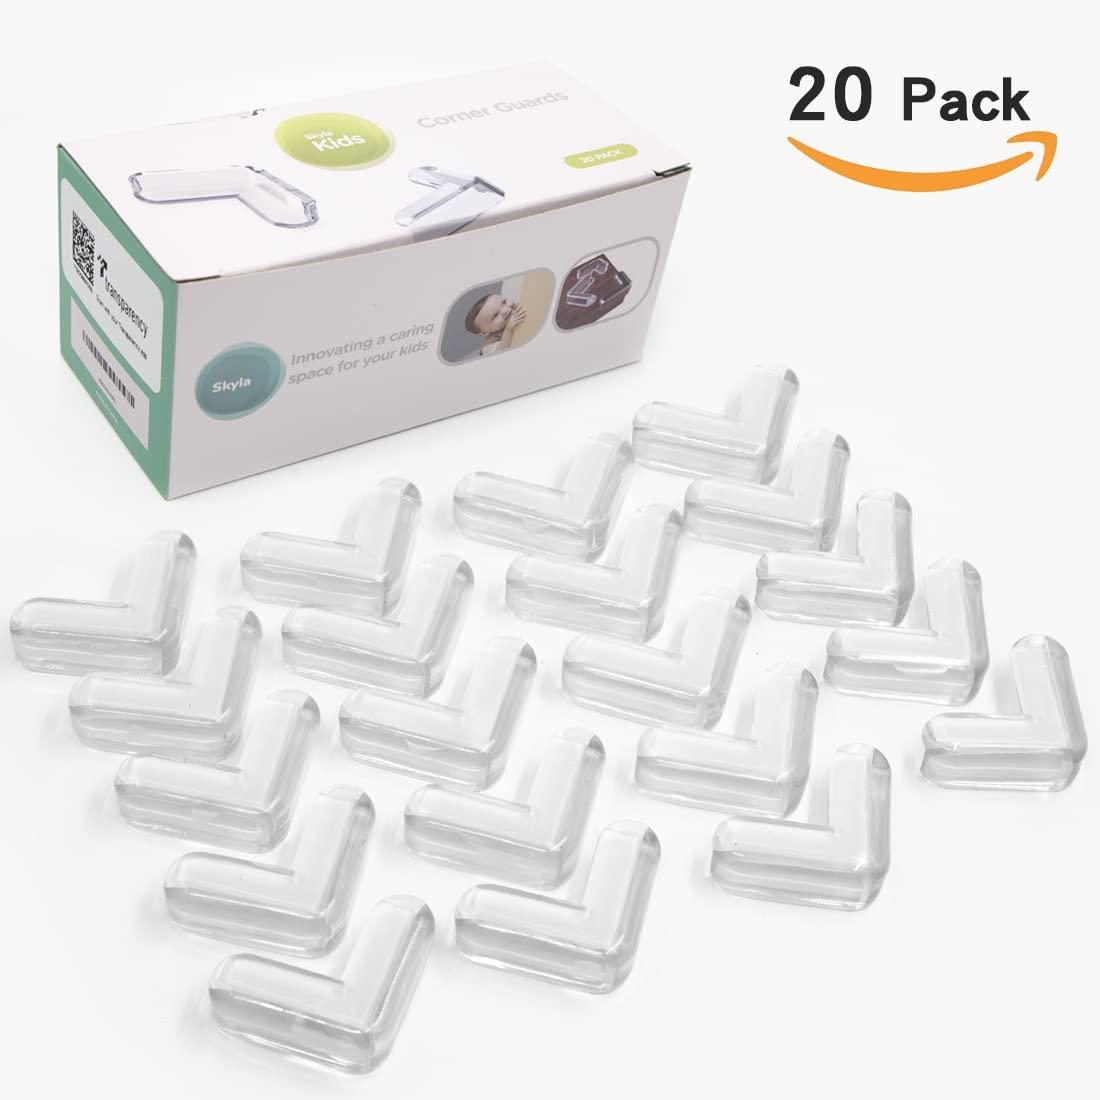 Clear Corner Guards(12 Pack),Table Corner Protectors,Clear Edge  Bumpers,High Resistant Adhesive Gel,Corner Protector For  Baby,Kids,Furniture,Cabinet,G